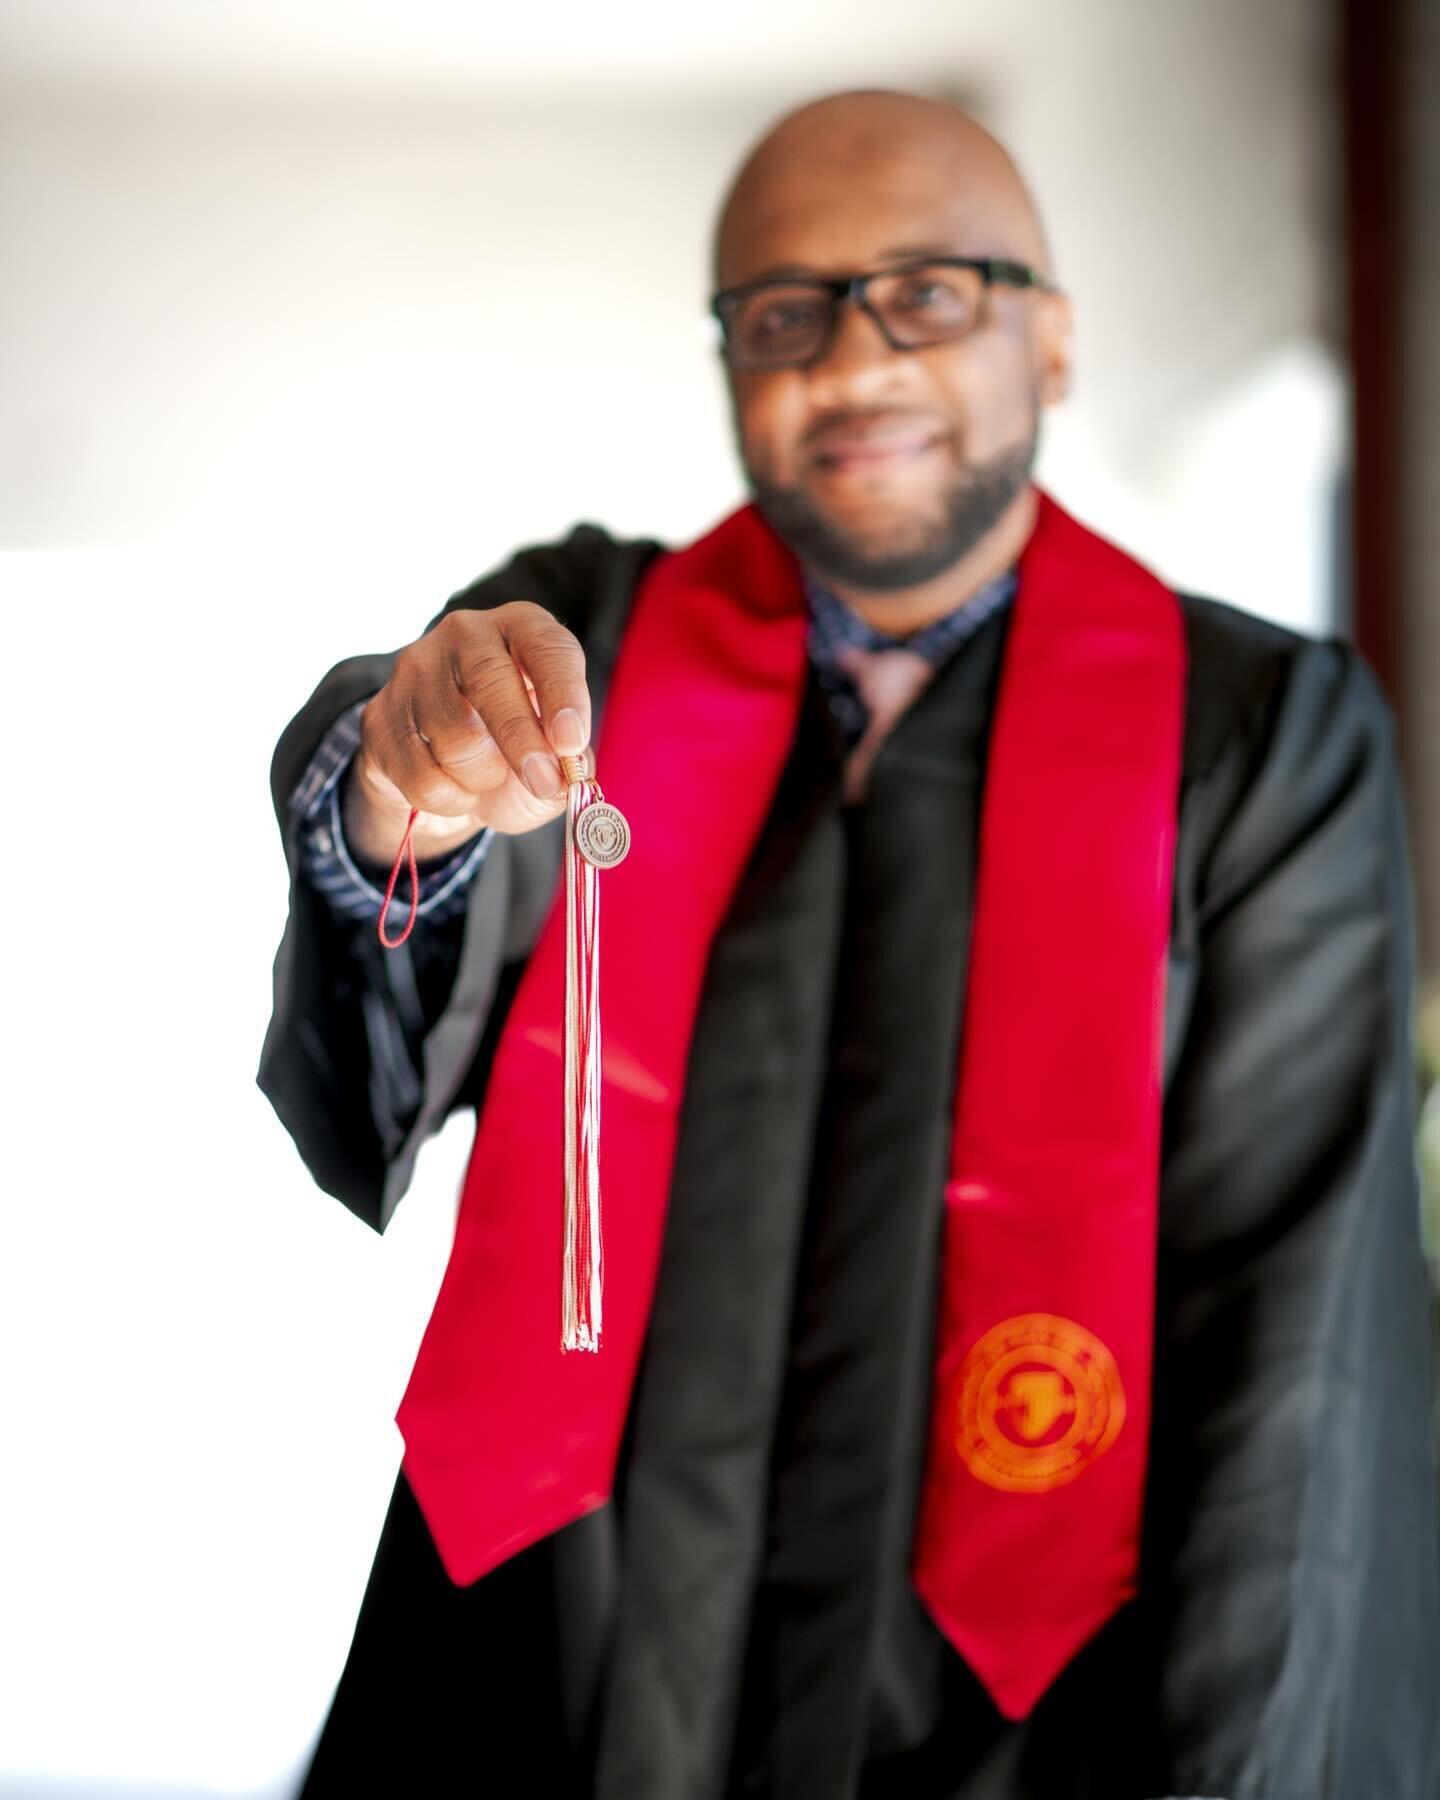 back when it was sunny and warm, anthony got his degree!! 

as you prepare to embark on the next chapter of your life, it&rsquo;s important to capture this special moment with memorable photos that will last a lifetime.

since you&rsquo;re indoors st